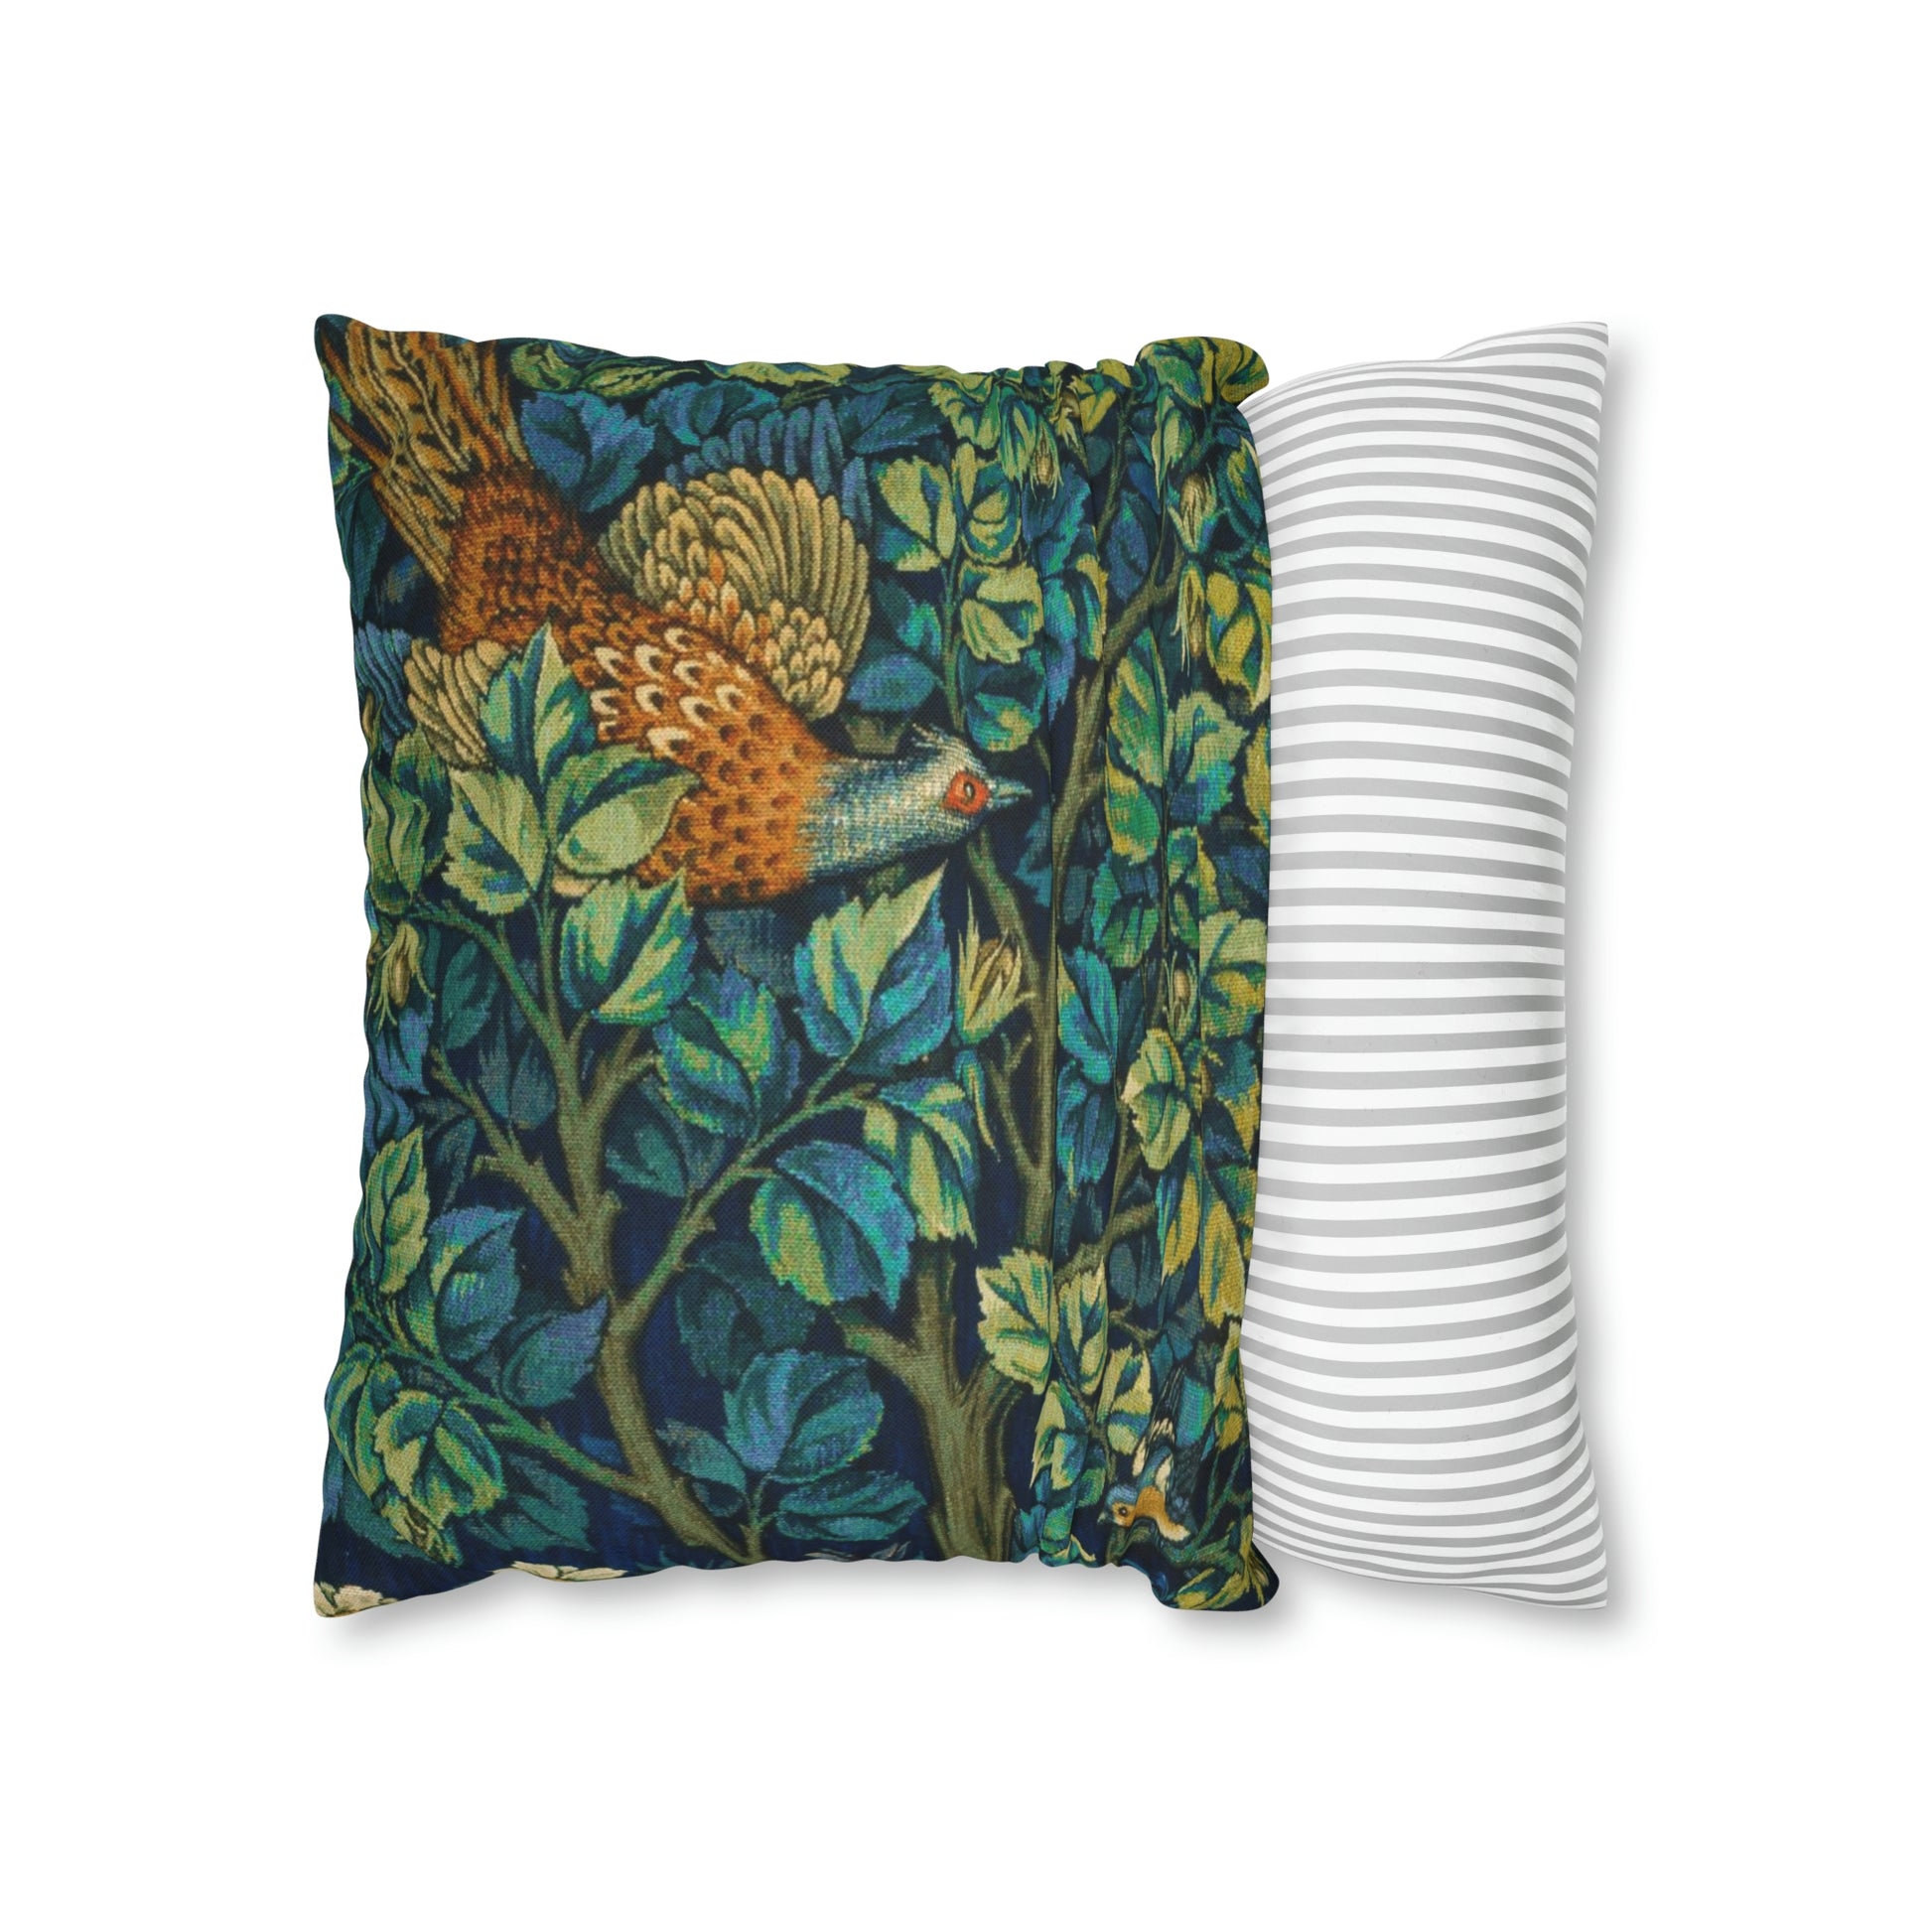 william-morris-co-cushion-cover-pheasant-and-squirrel-collection-pheasant-blue-16